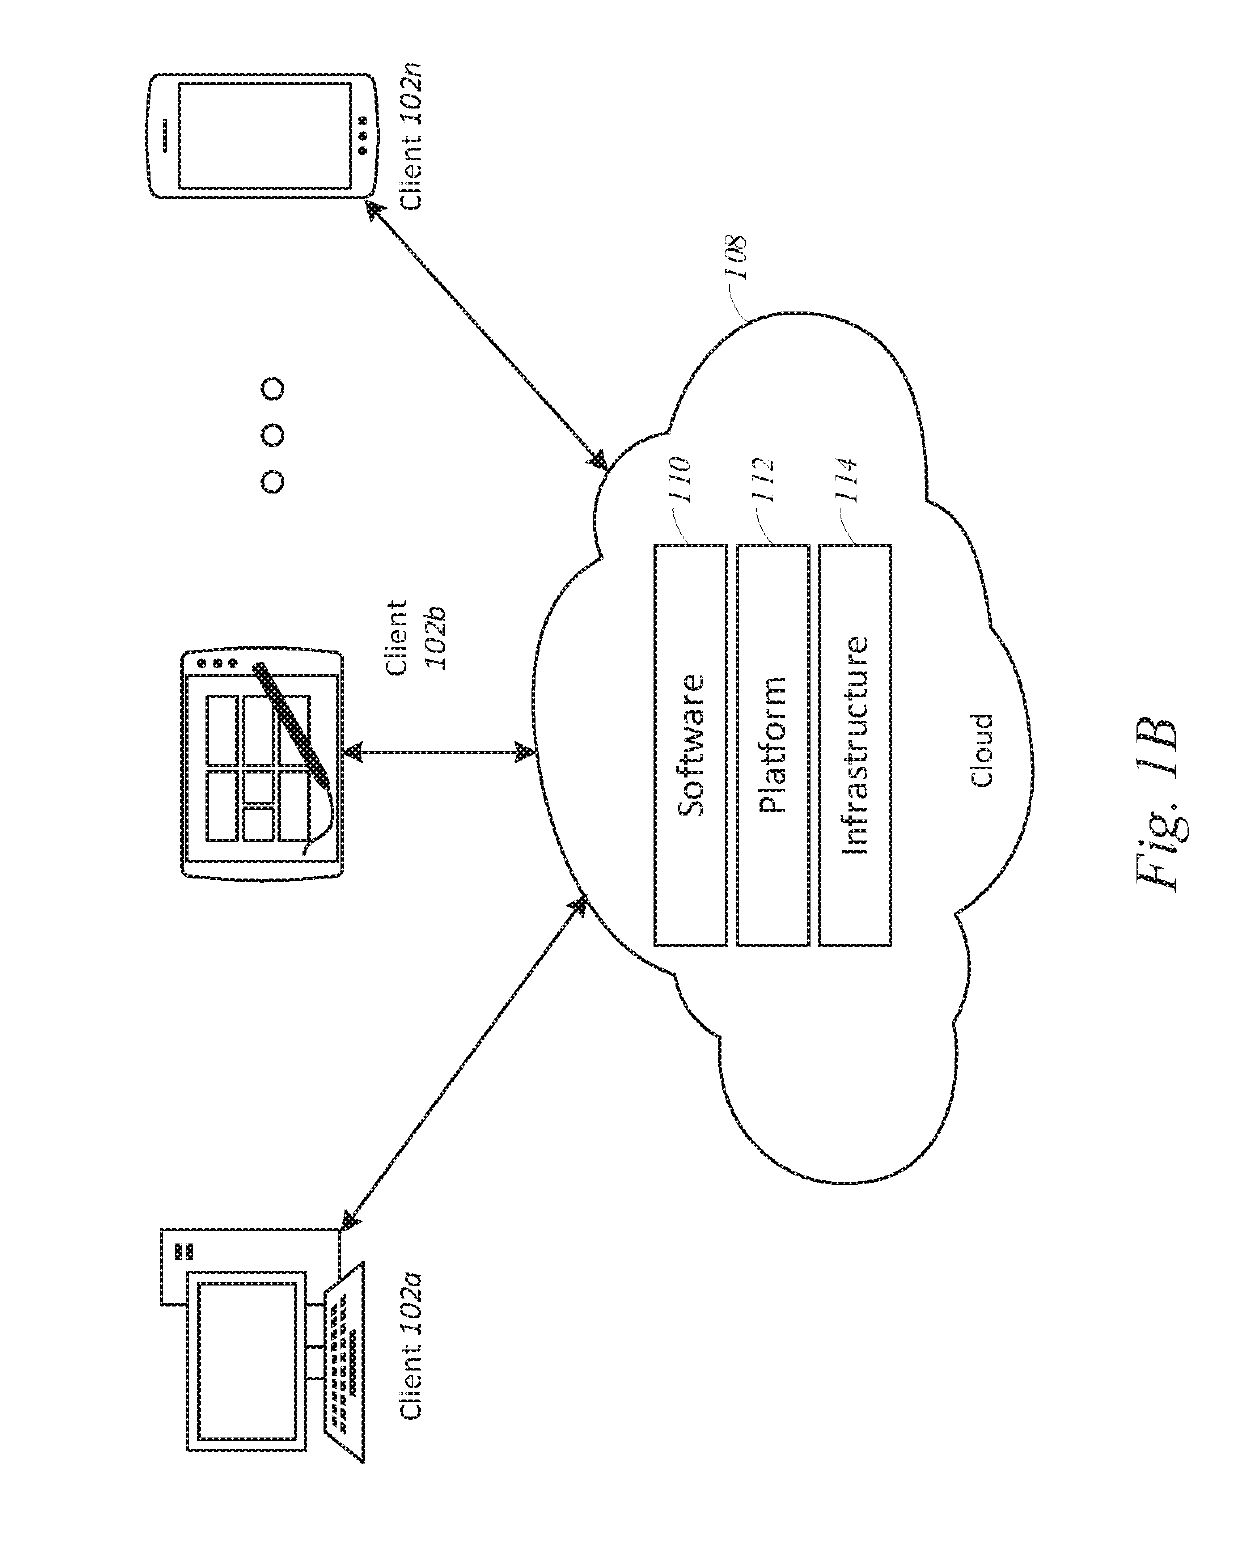 System and methods for reverse vishing and point of failure remedial training